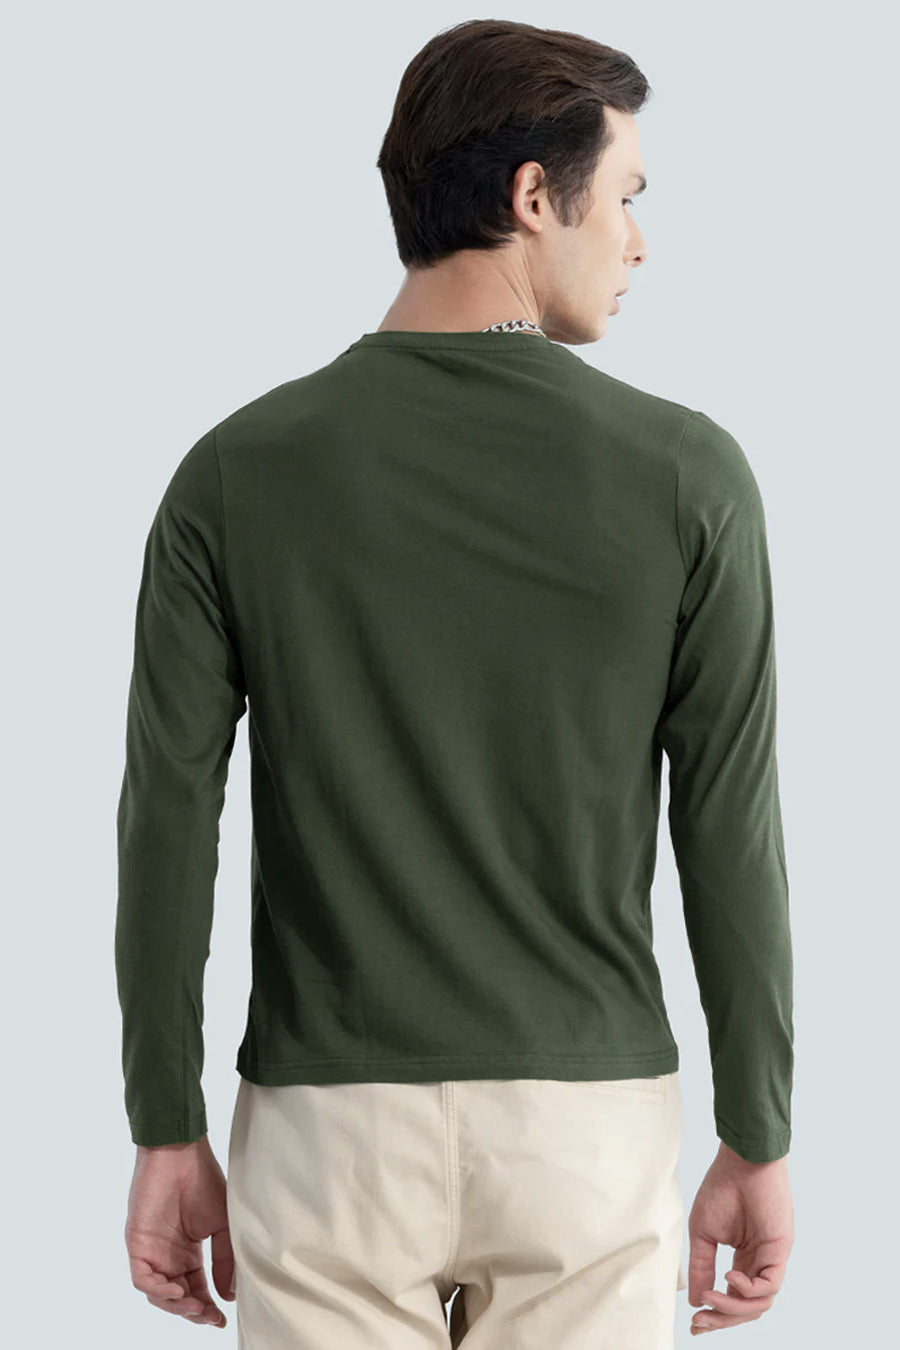 Classic Full sleeve in Army green